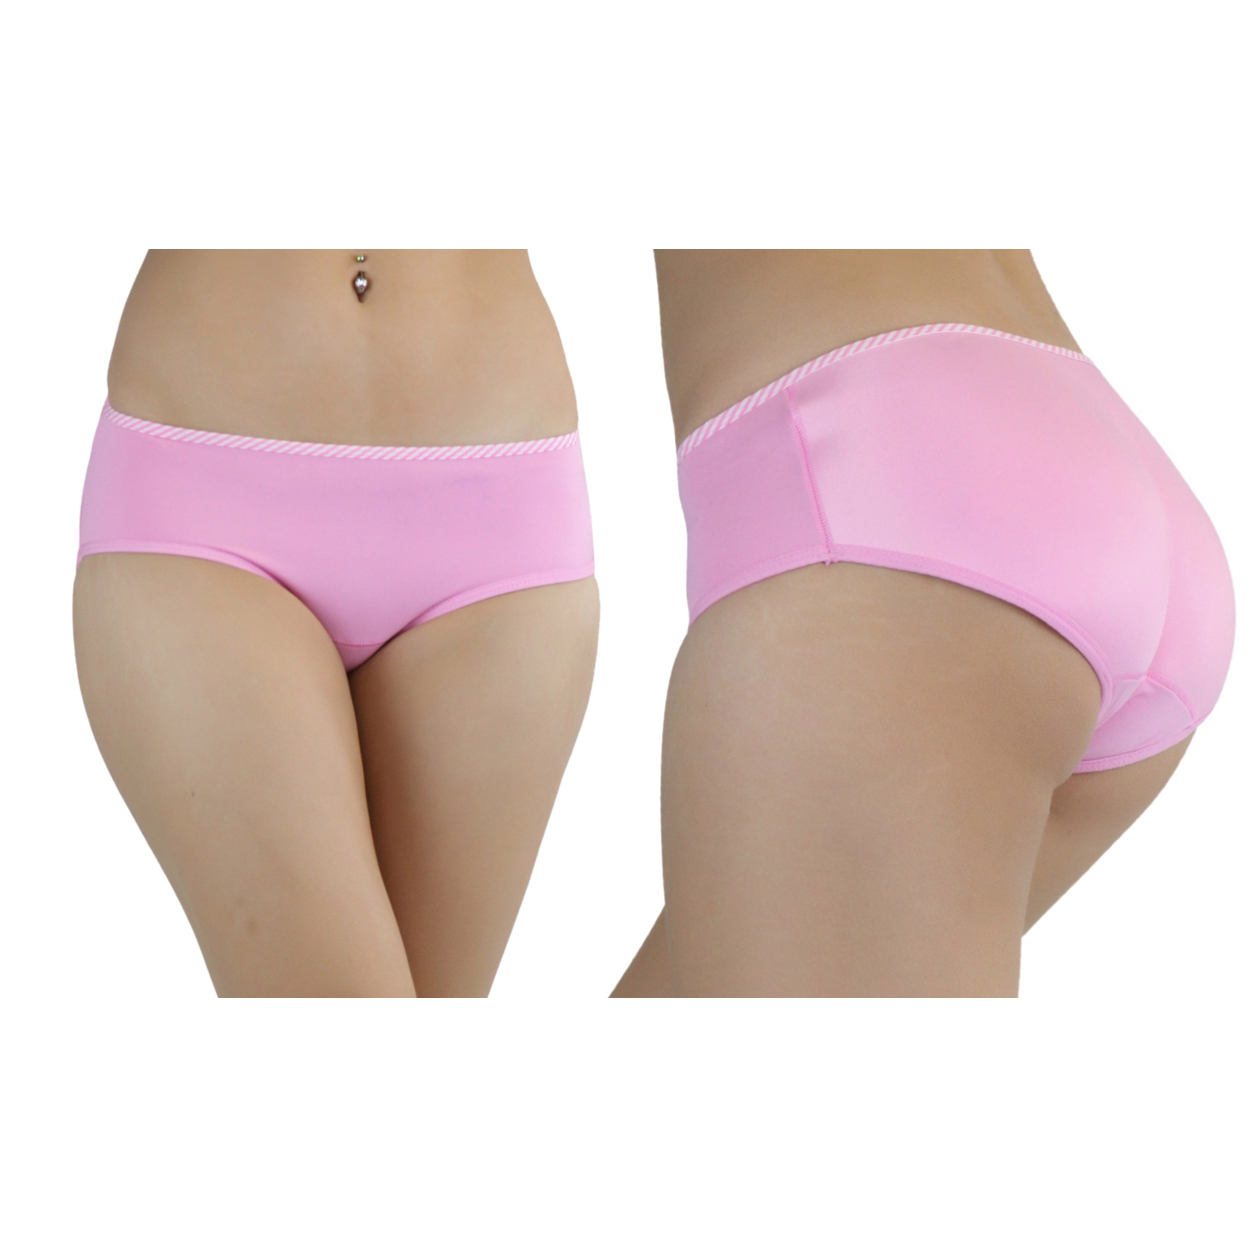 Women's Instant Booty Boosters Padded Panty - Pink, S